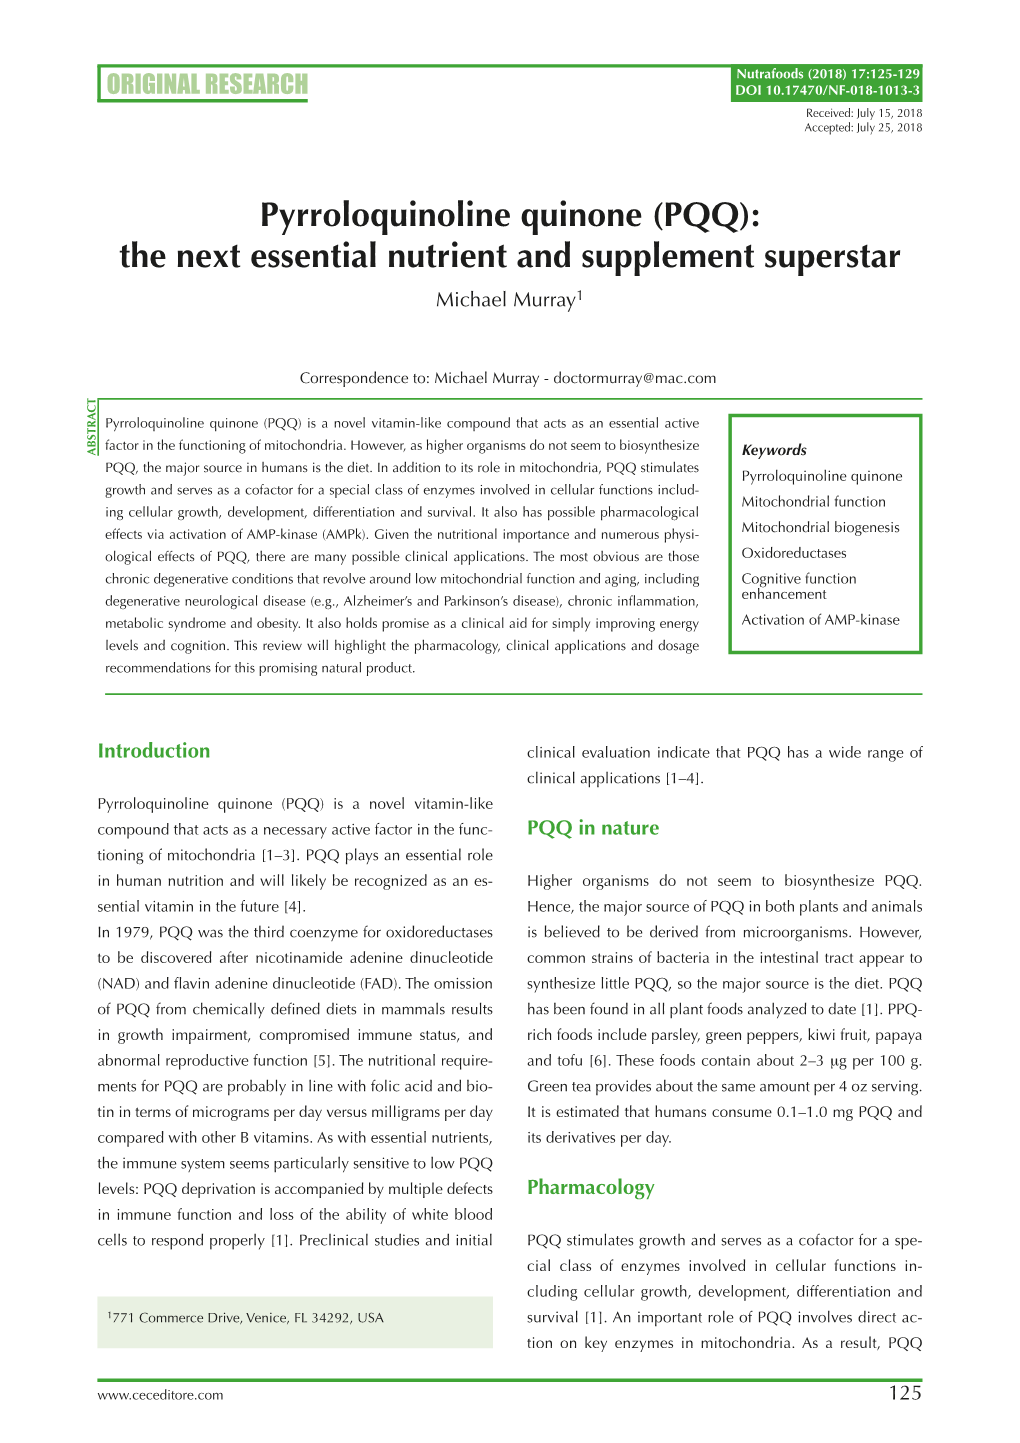 (PQQ): the Next Essential Nutrient and Supplement Superstar Michael Murray1